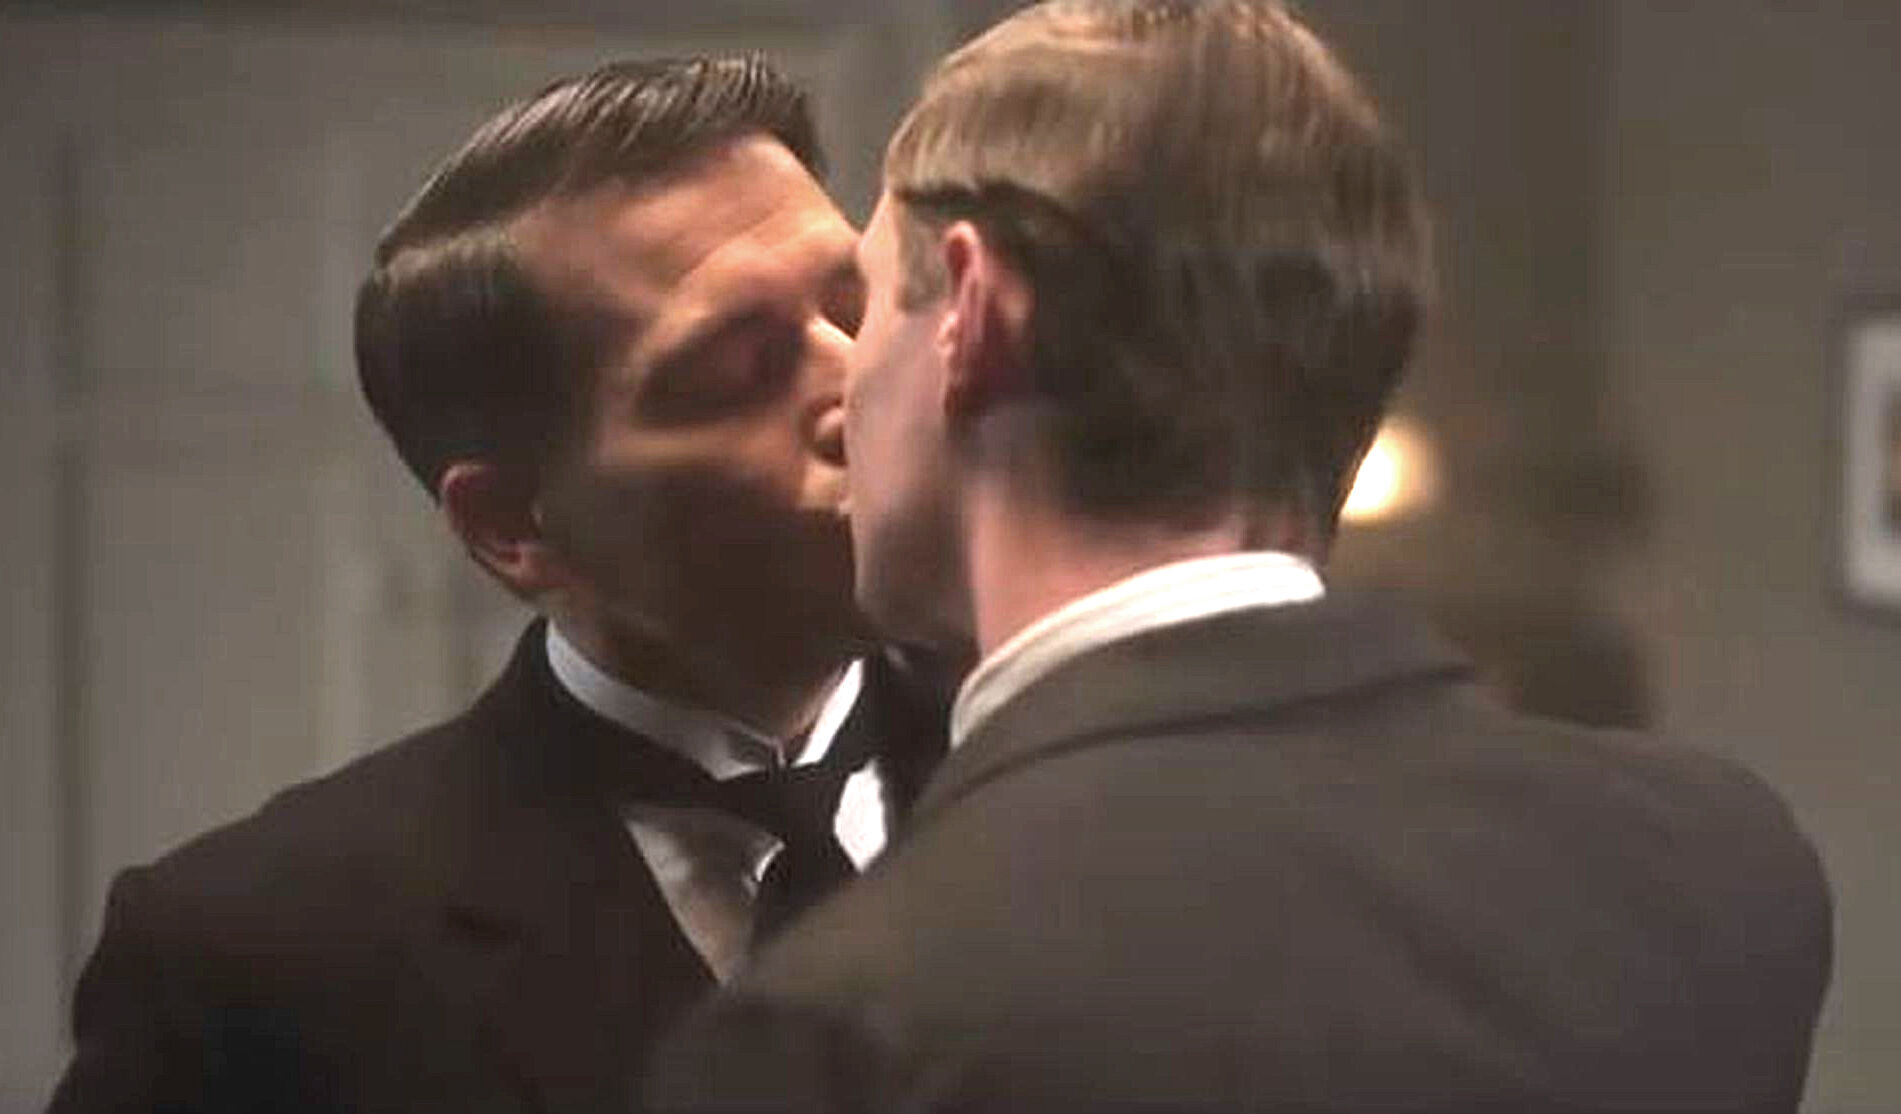 &#8216;Downton Abbey&#8217; filmmakers had to appeal to get &#8216;PG&#8217; rating with gay content